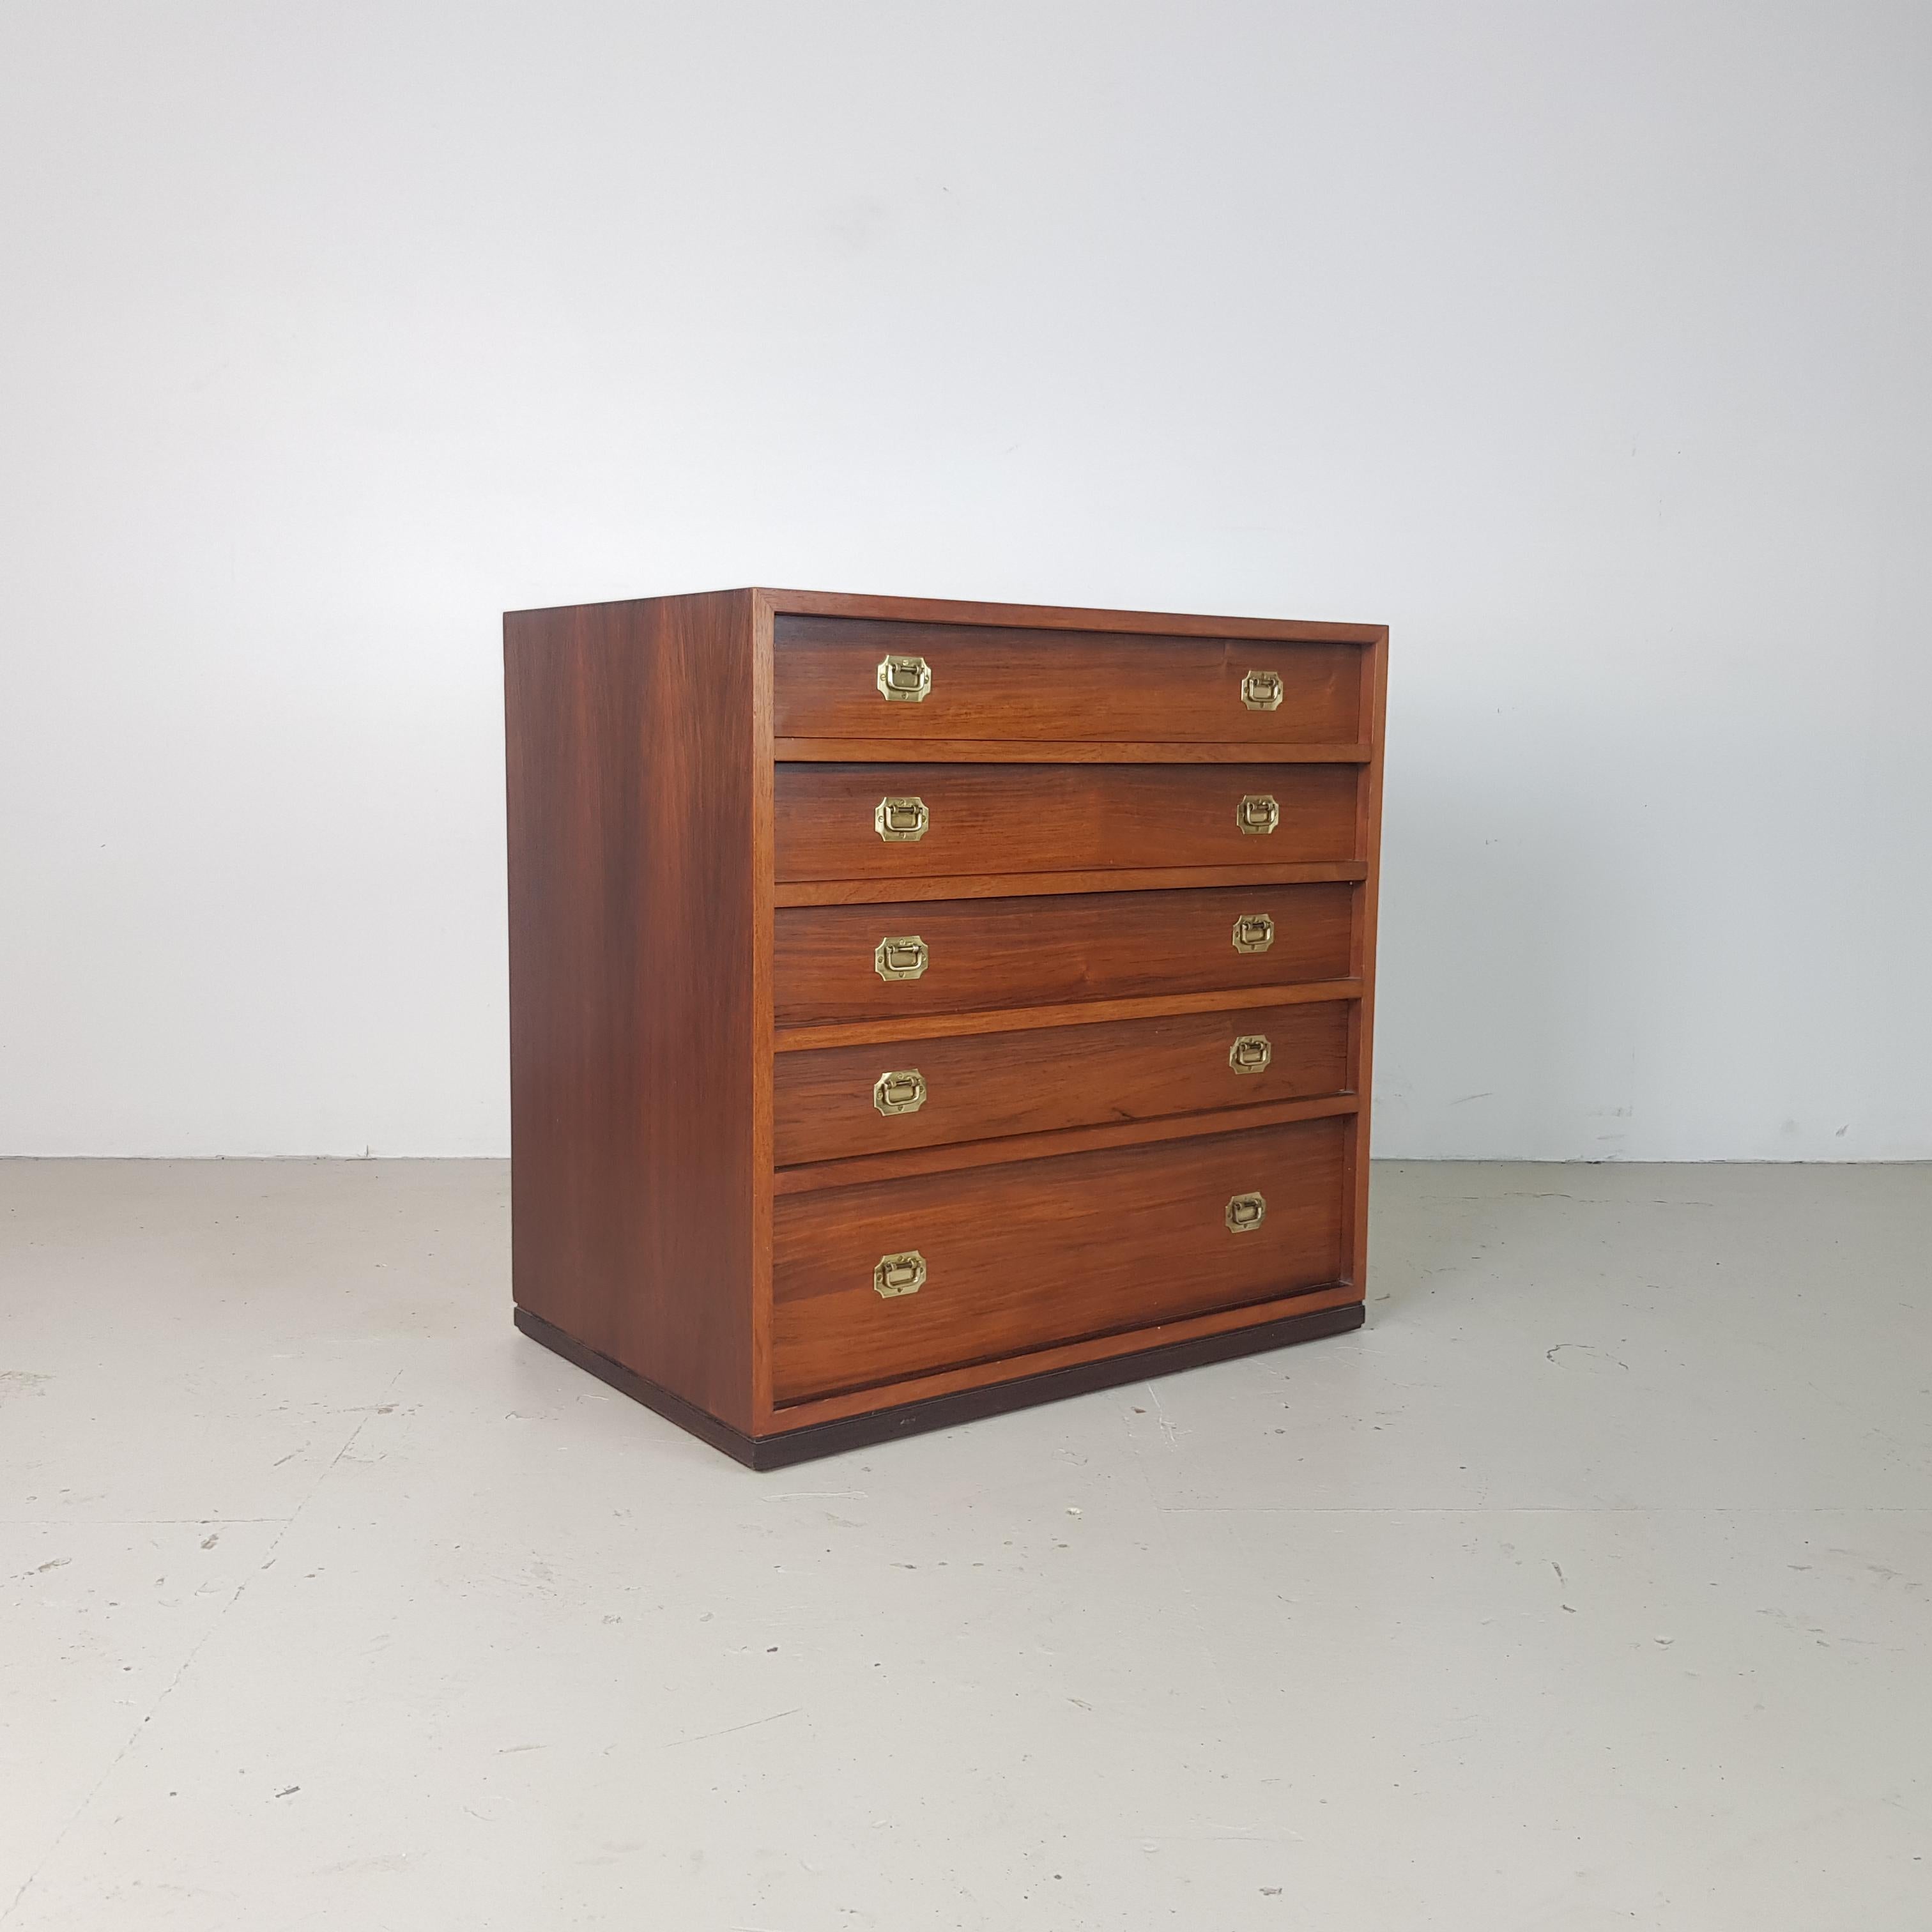 Lovely 5 drawer teak chest of drawers with original metal handles.

Approximate dimensions:

Height: 65cm

Depth: 43cm

Width: 65cm

Drawers: W 59cm, D 37cm, H 7/14cm.

In good vintage condition.
      